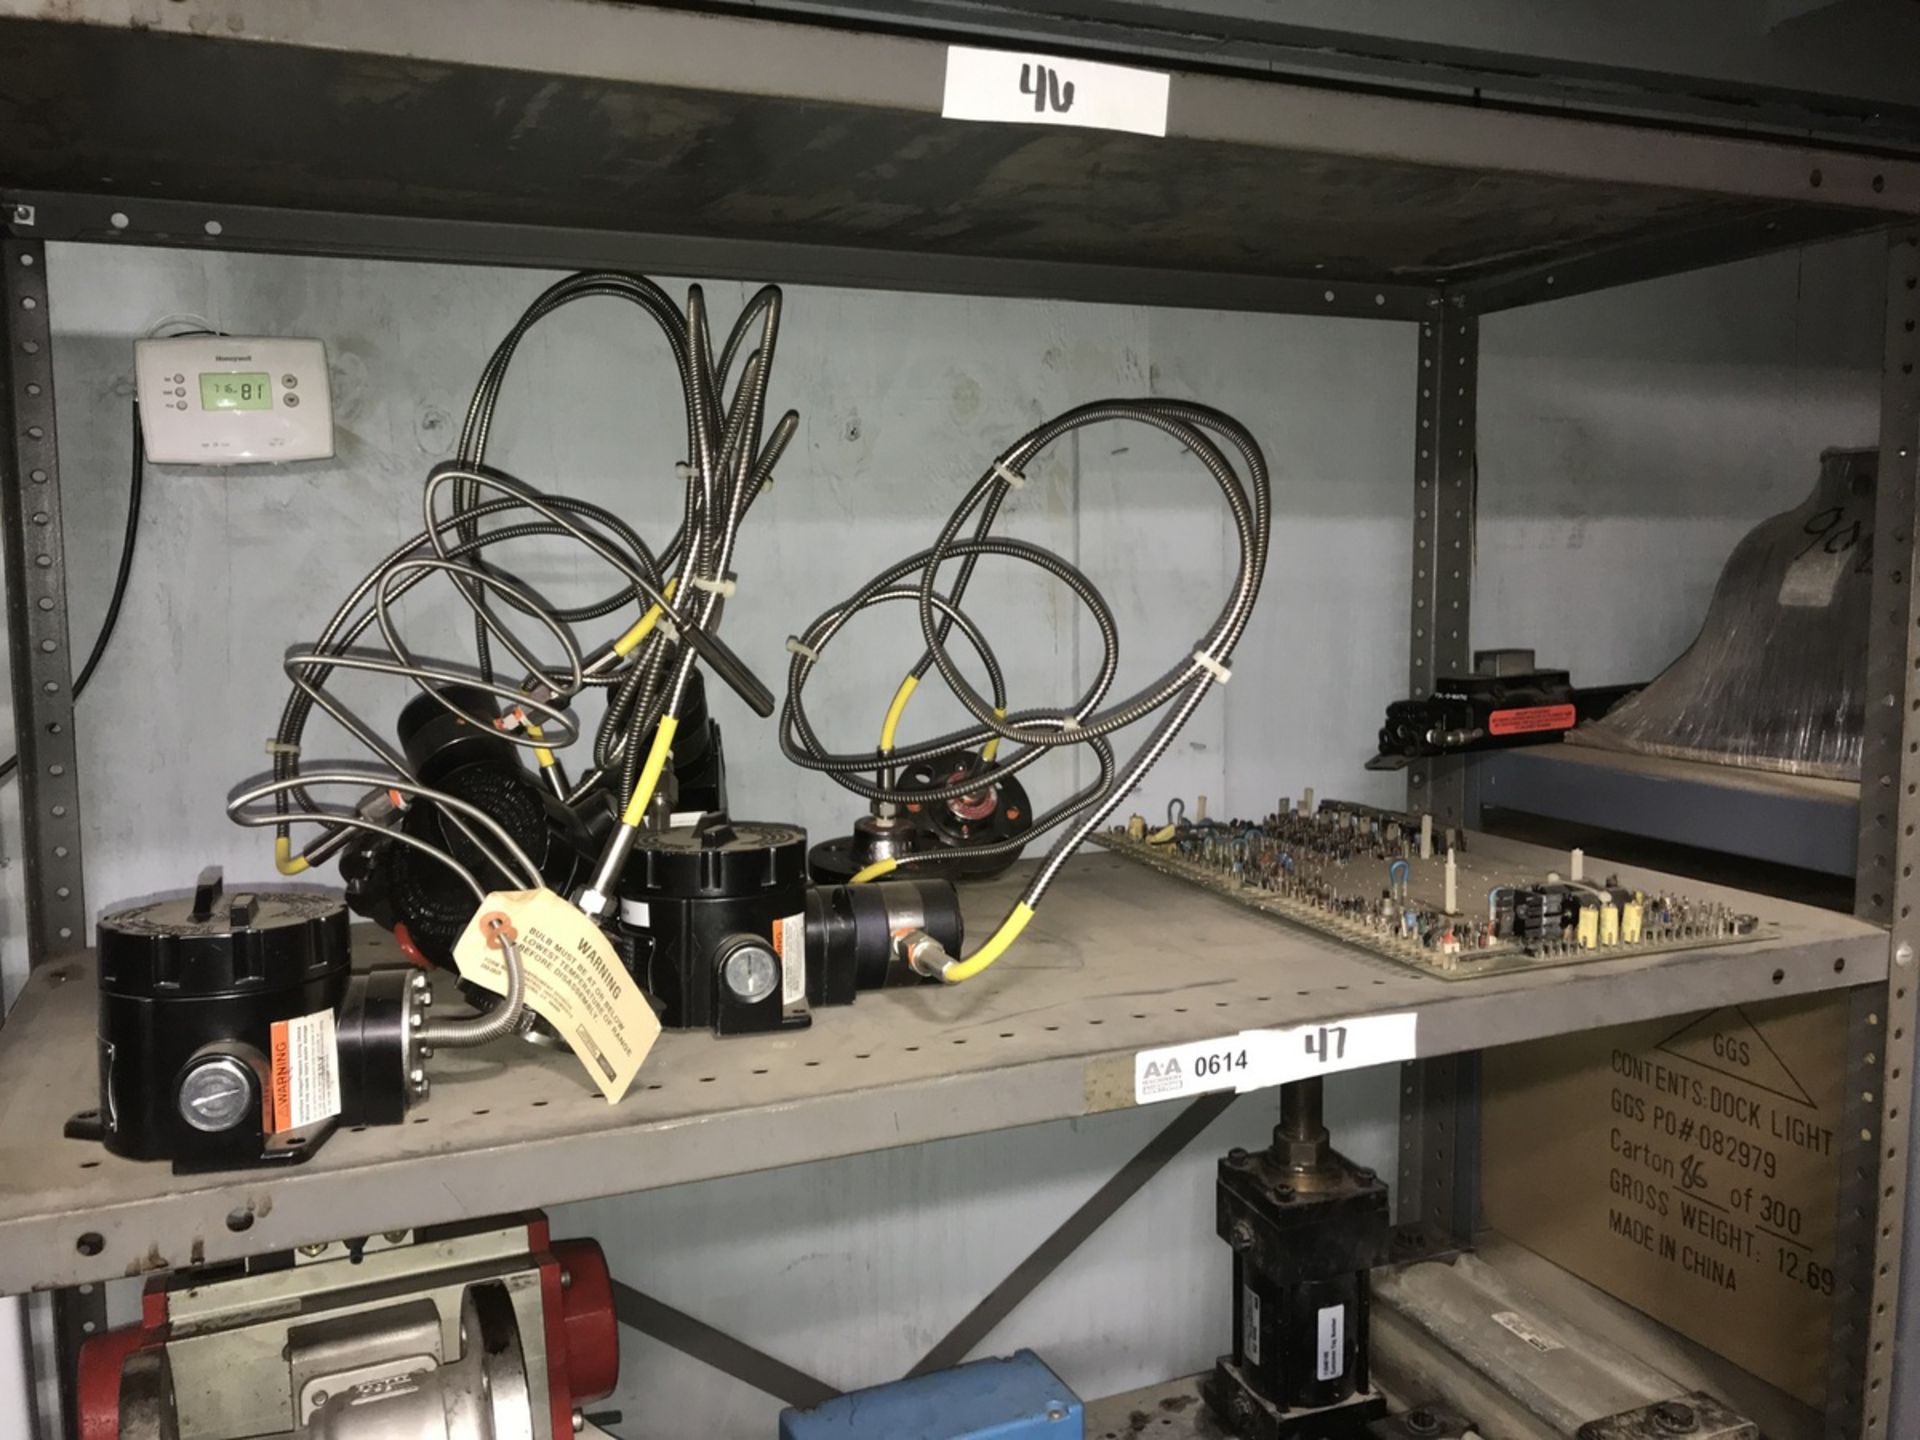 Contents of Shelf including boards, transmitters